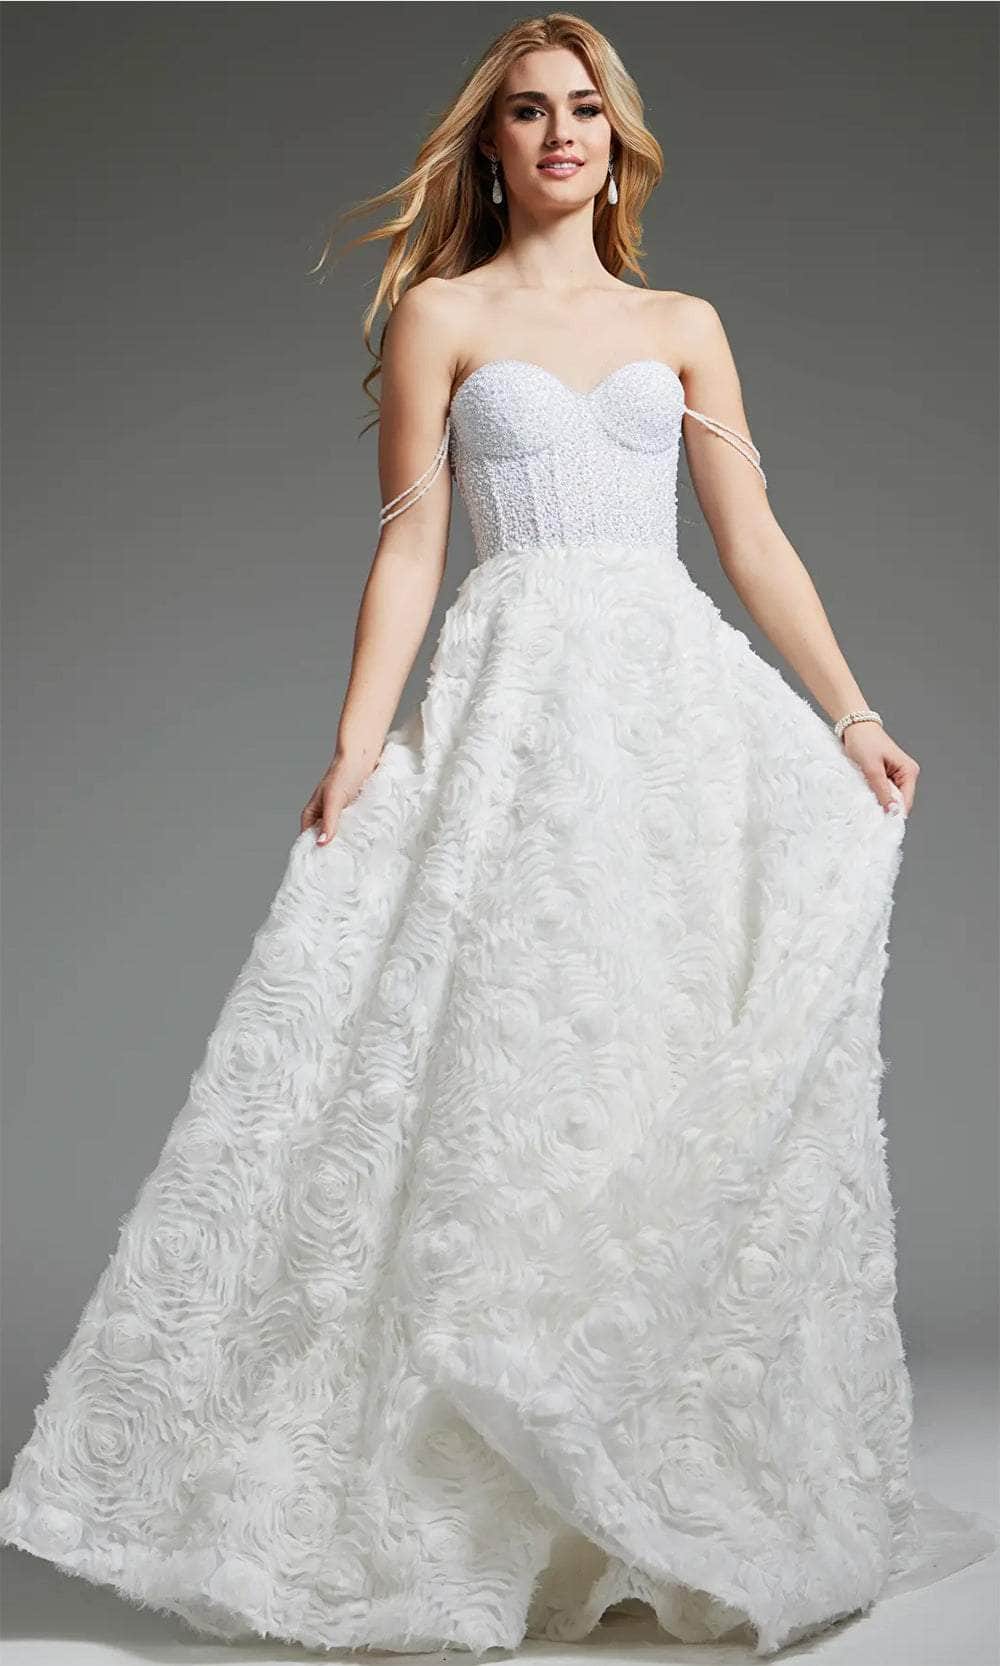 Image of Jovani JB36644 - Floral Texture Bridal Gown